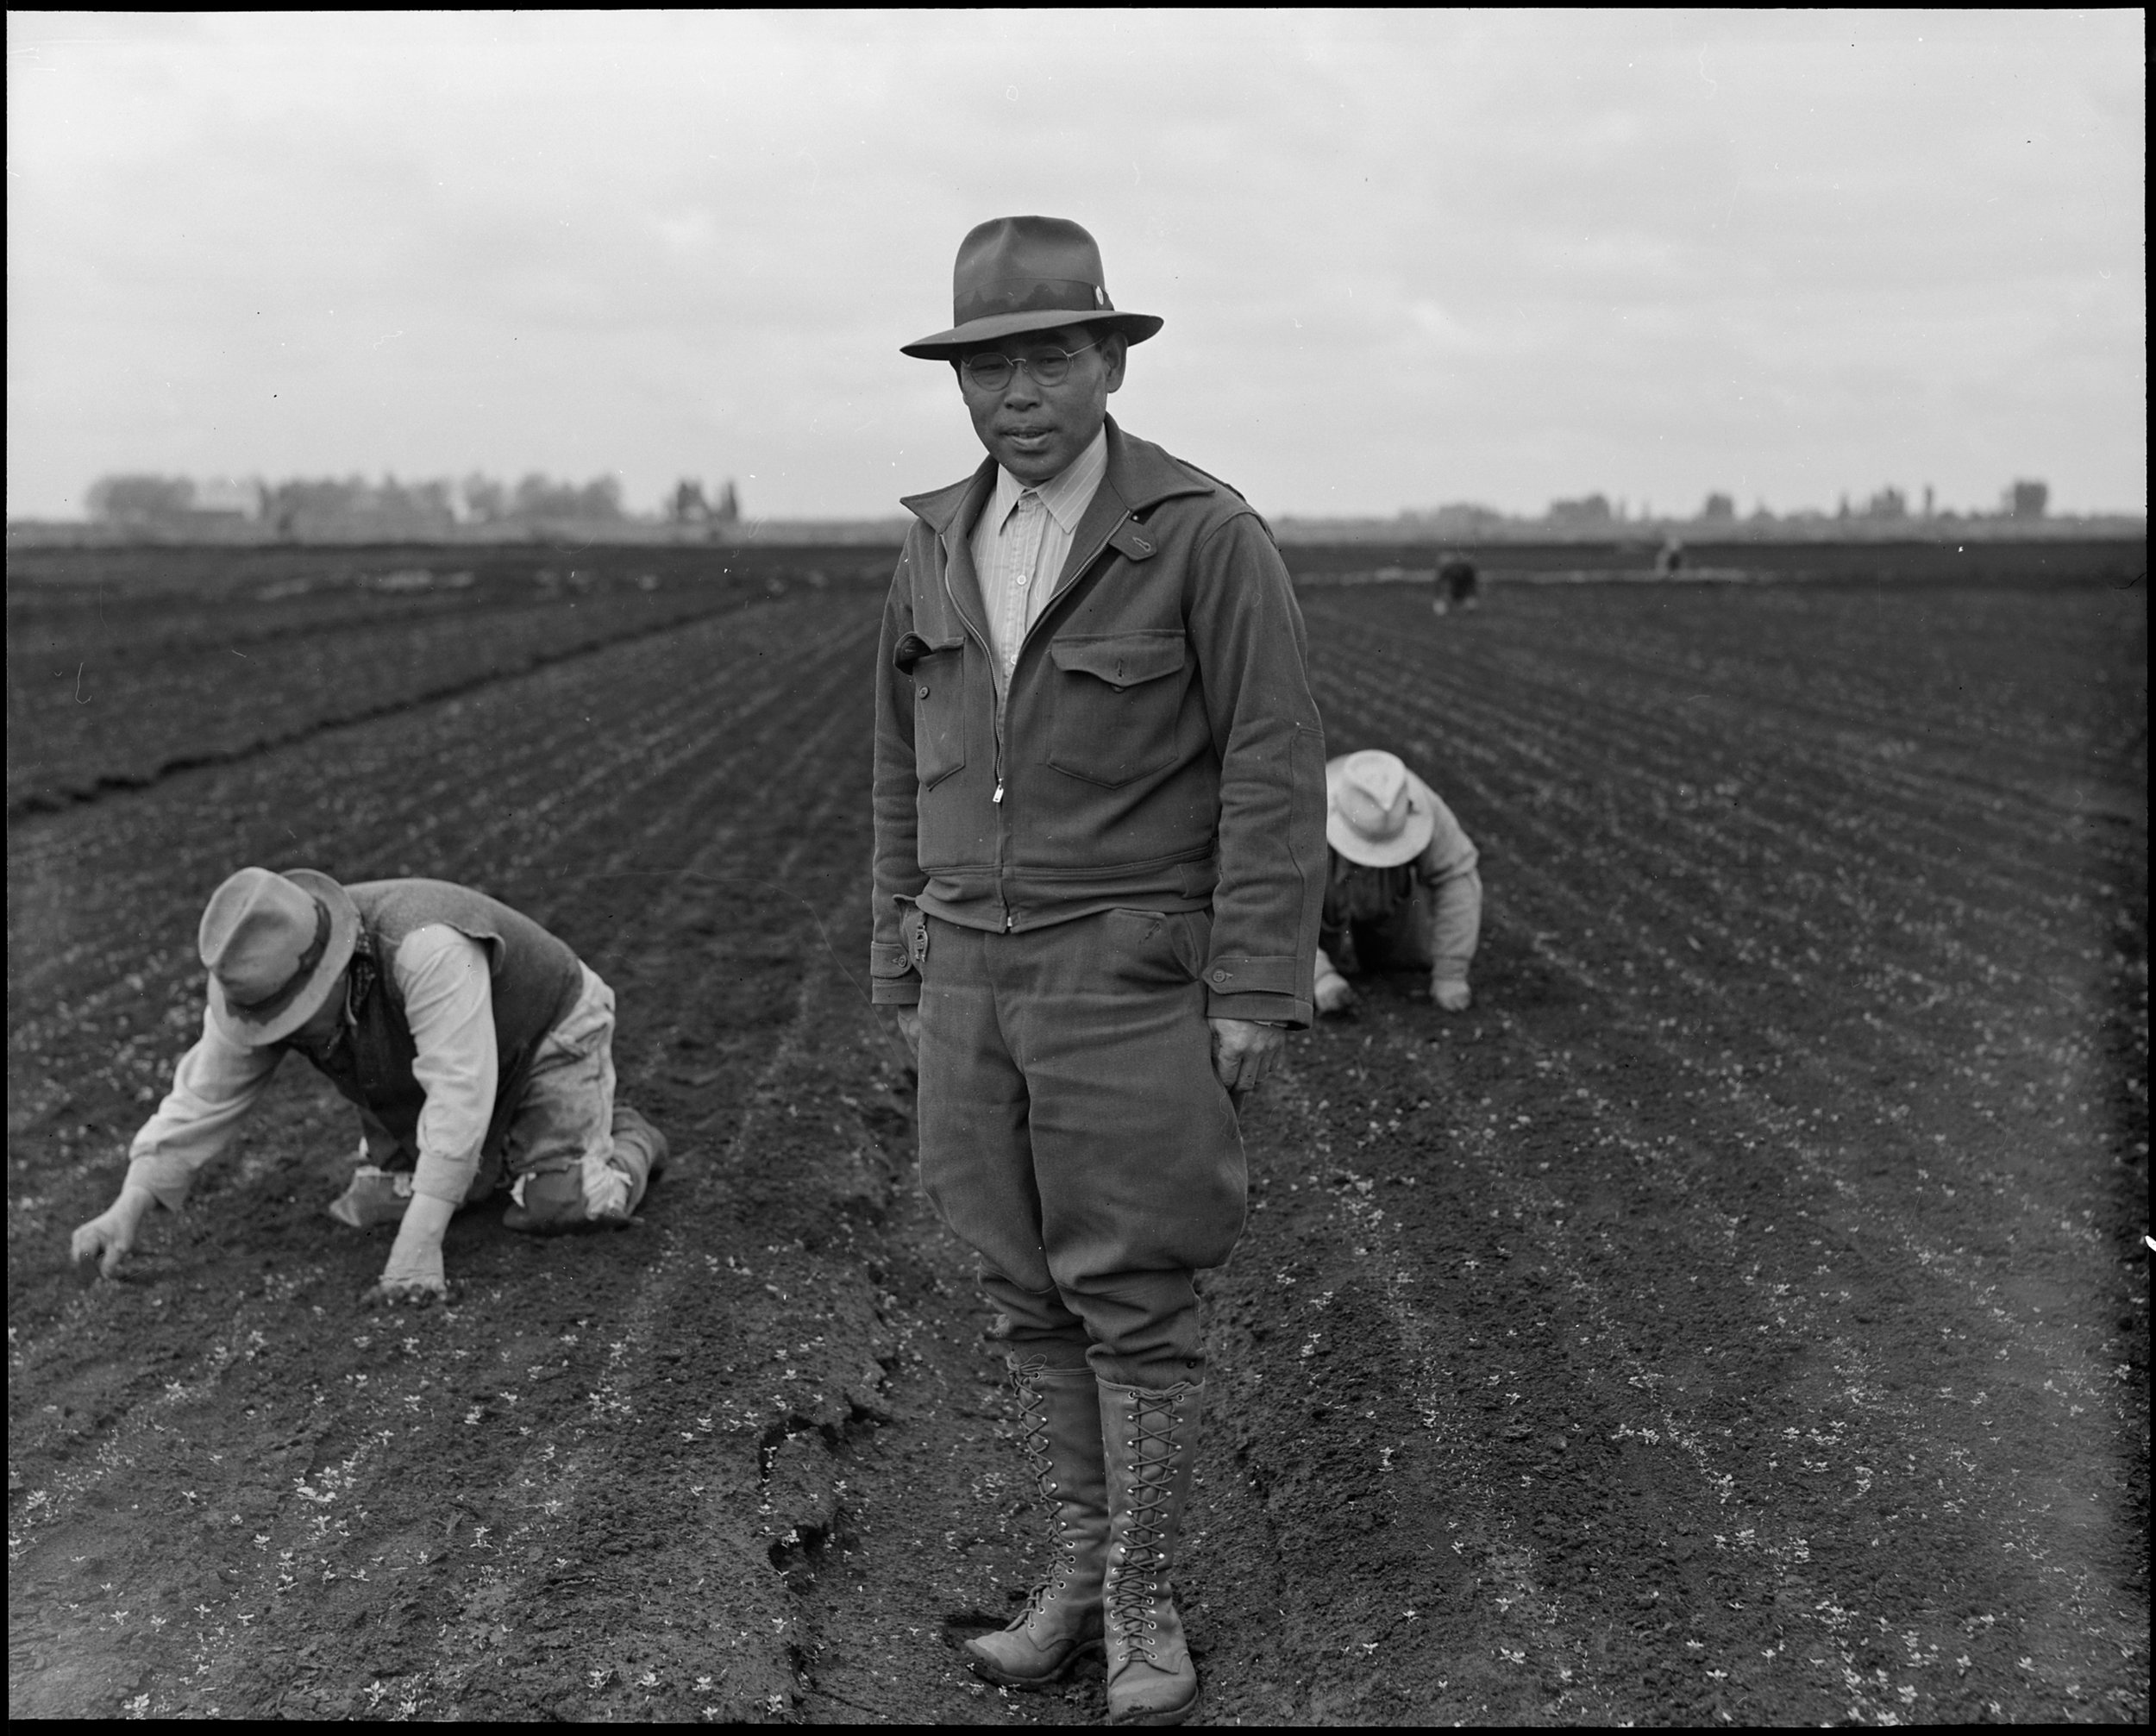  Stockton, California. Weeding celery field in the Delta region, prior to evacuation. Henry Futamachi, ranch manager, in foreground. Farmers and other evacuees of Japanese ancestry will be given opportunities to follow their callings in War Relocatio